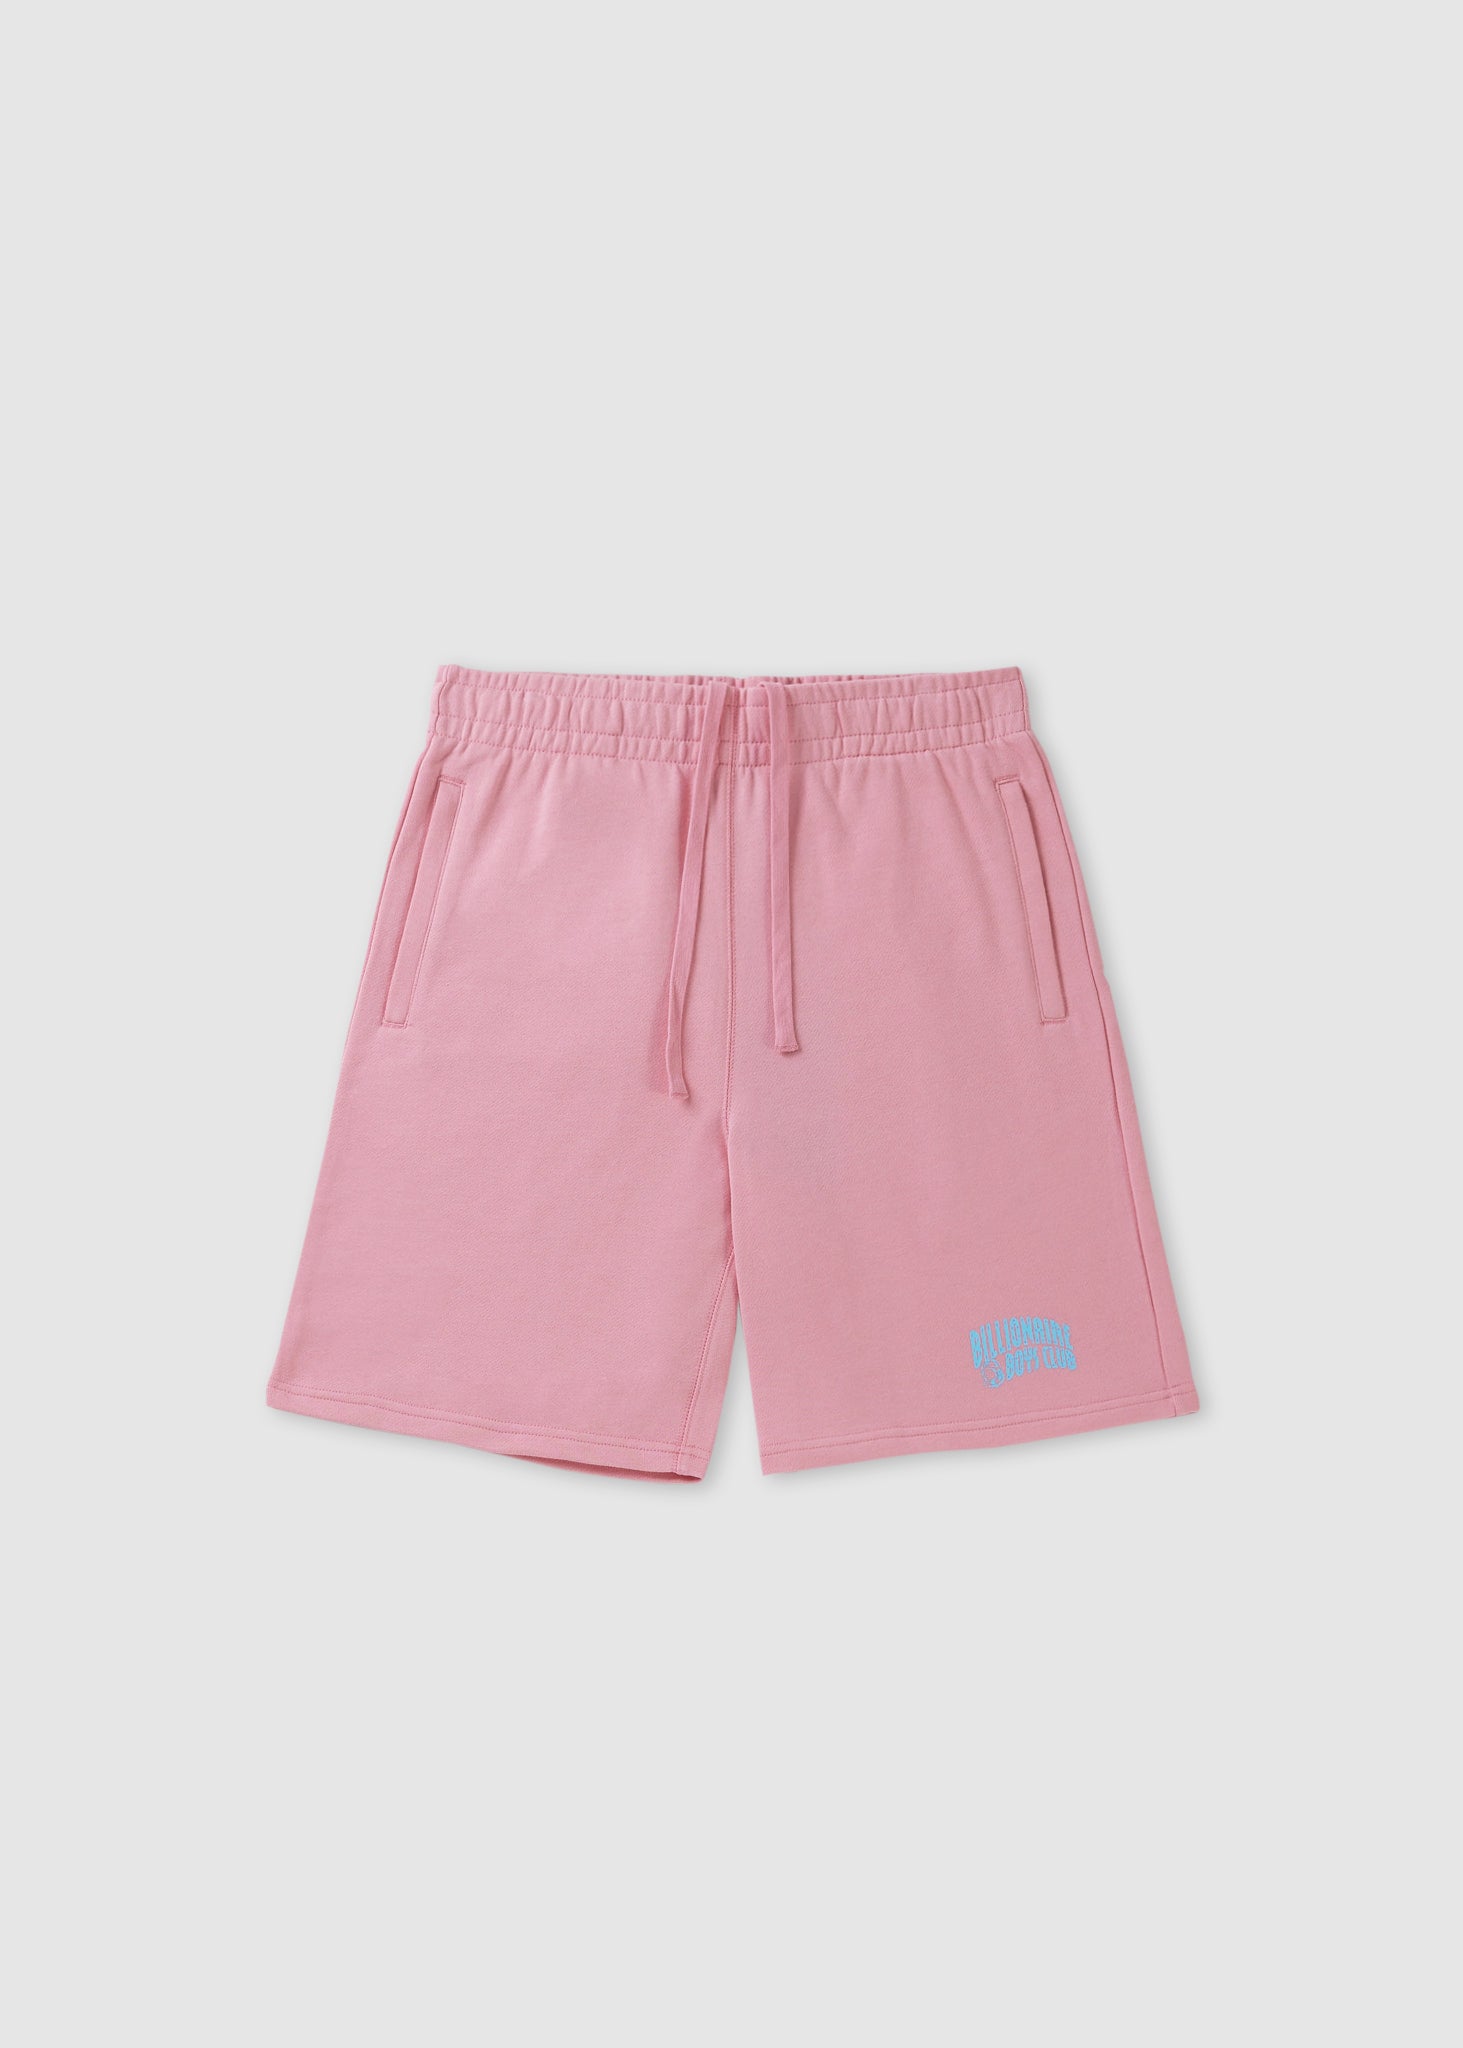 Image of Billionaire Boys Club Mens Small Arch Logo Shorts In Pink